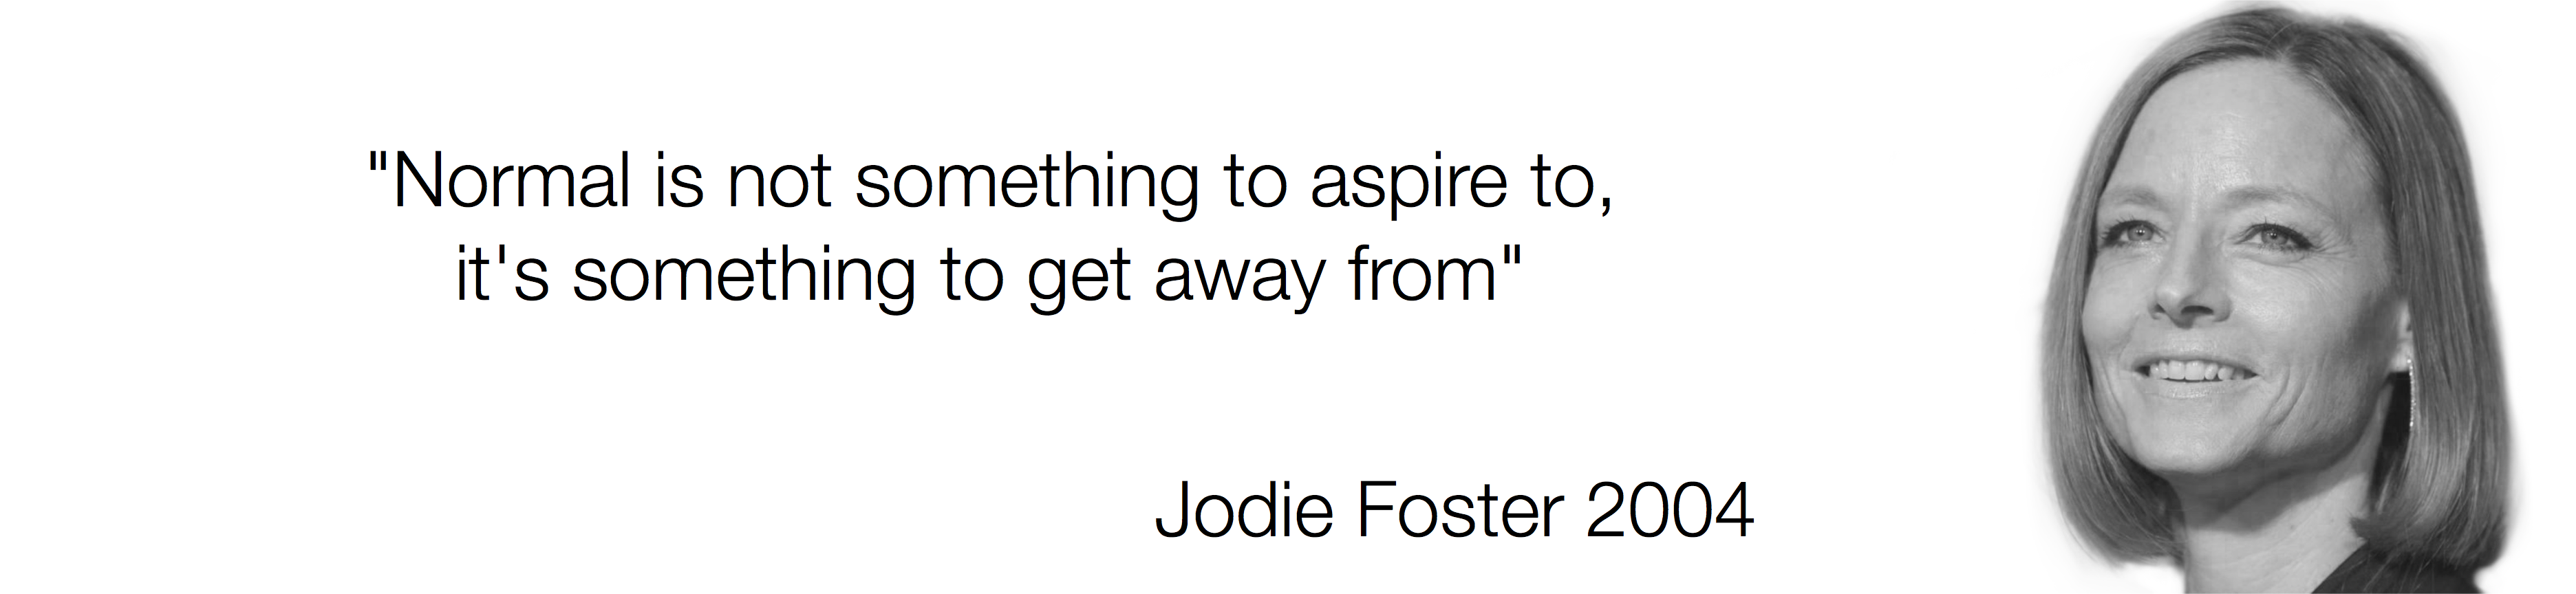 foster quote